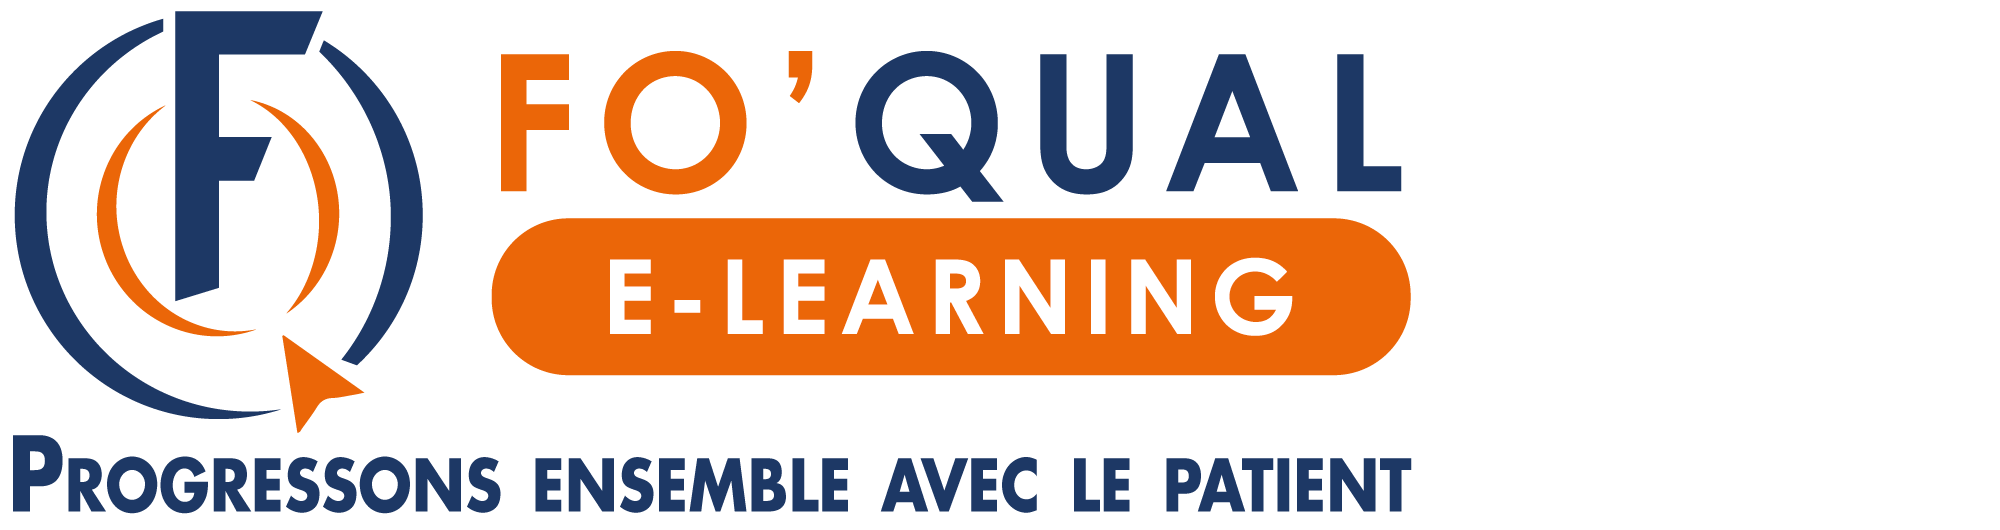 FO’QUAL : solutions e-learning